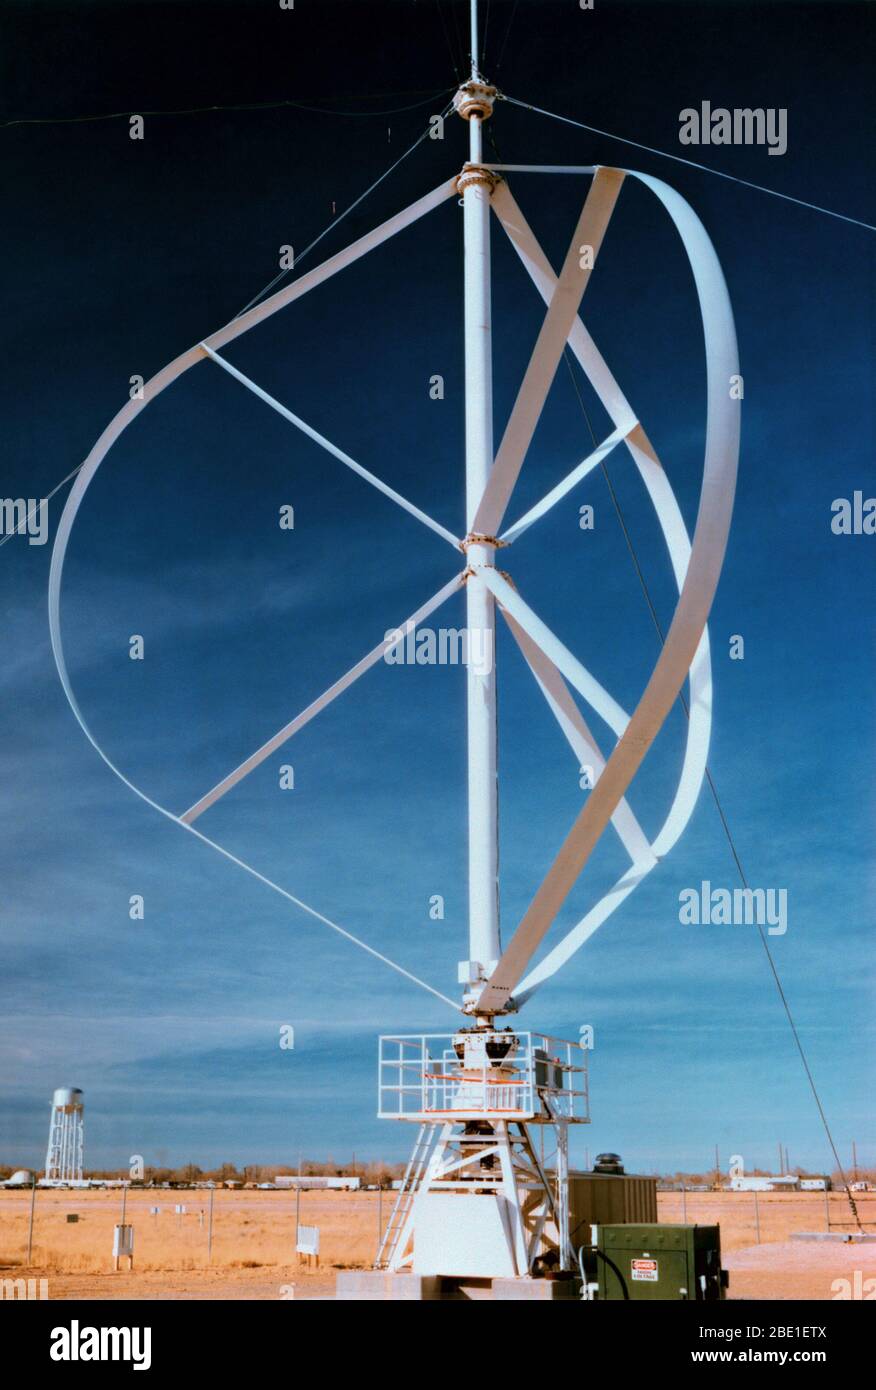 A view of a vertical axis wind turbine of the Darrieus design.  This machine is 17 meters high and produces up to 150 kilowatts of wind power. Stock Photo